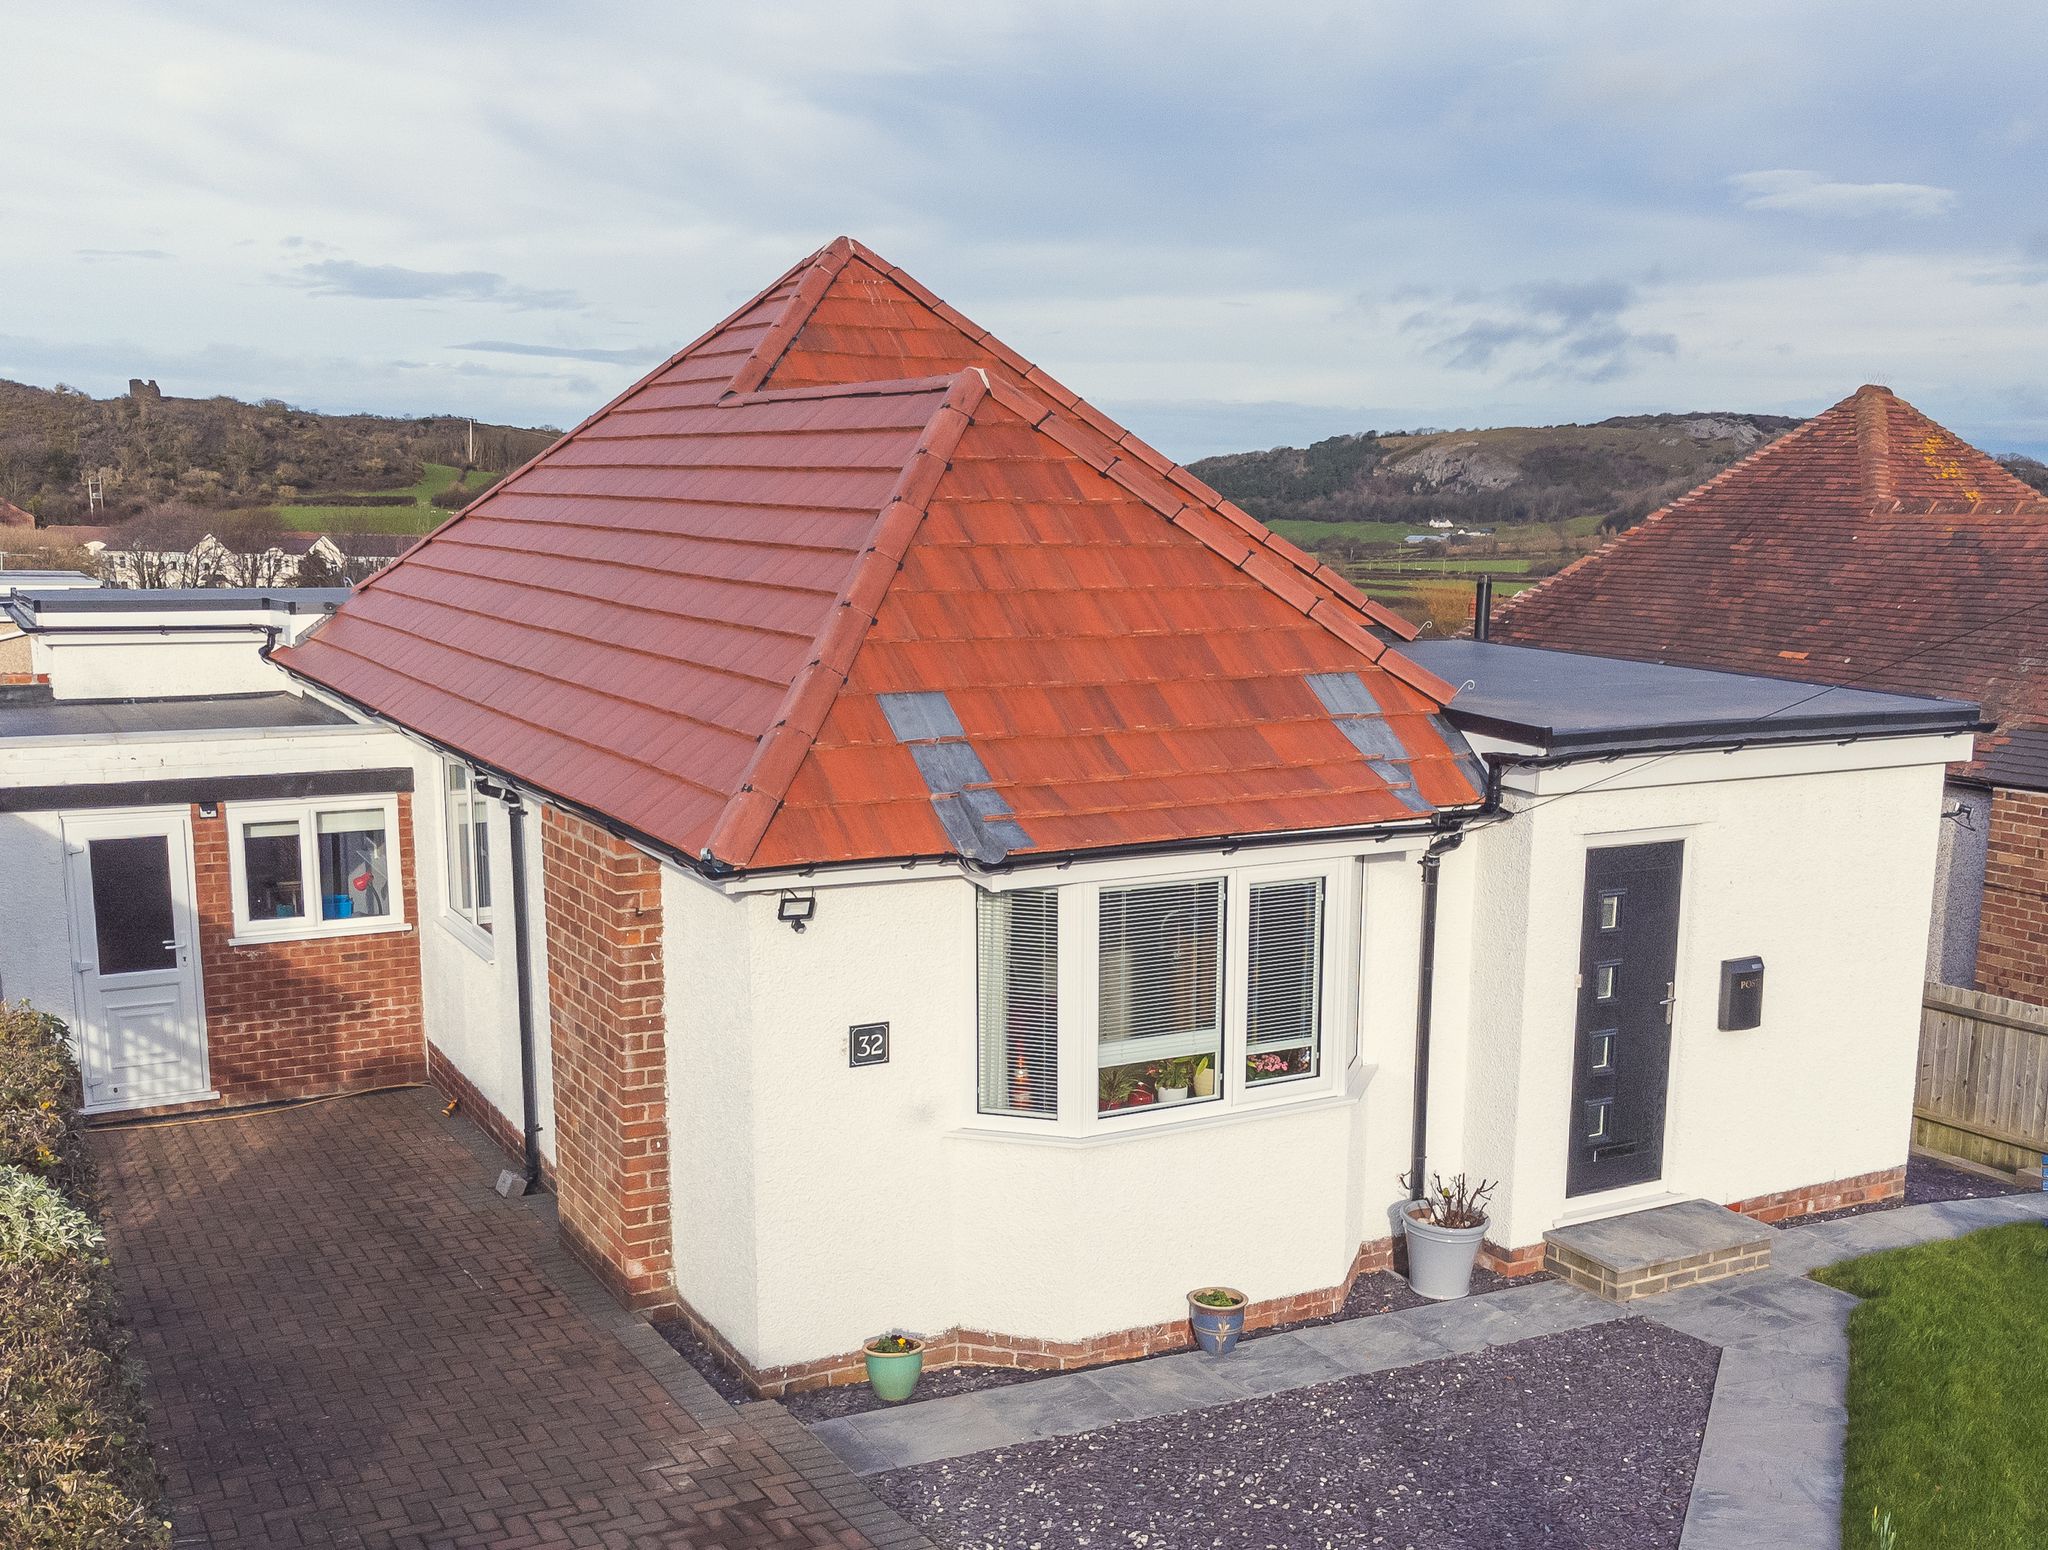 Tile Roof Contractors Gwalchmai, LL65 - DD Roofing